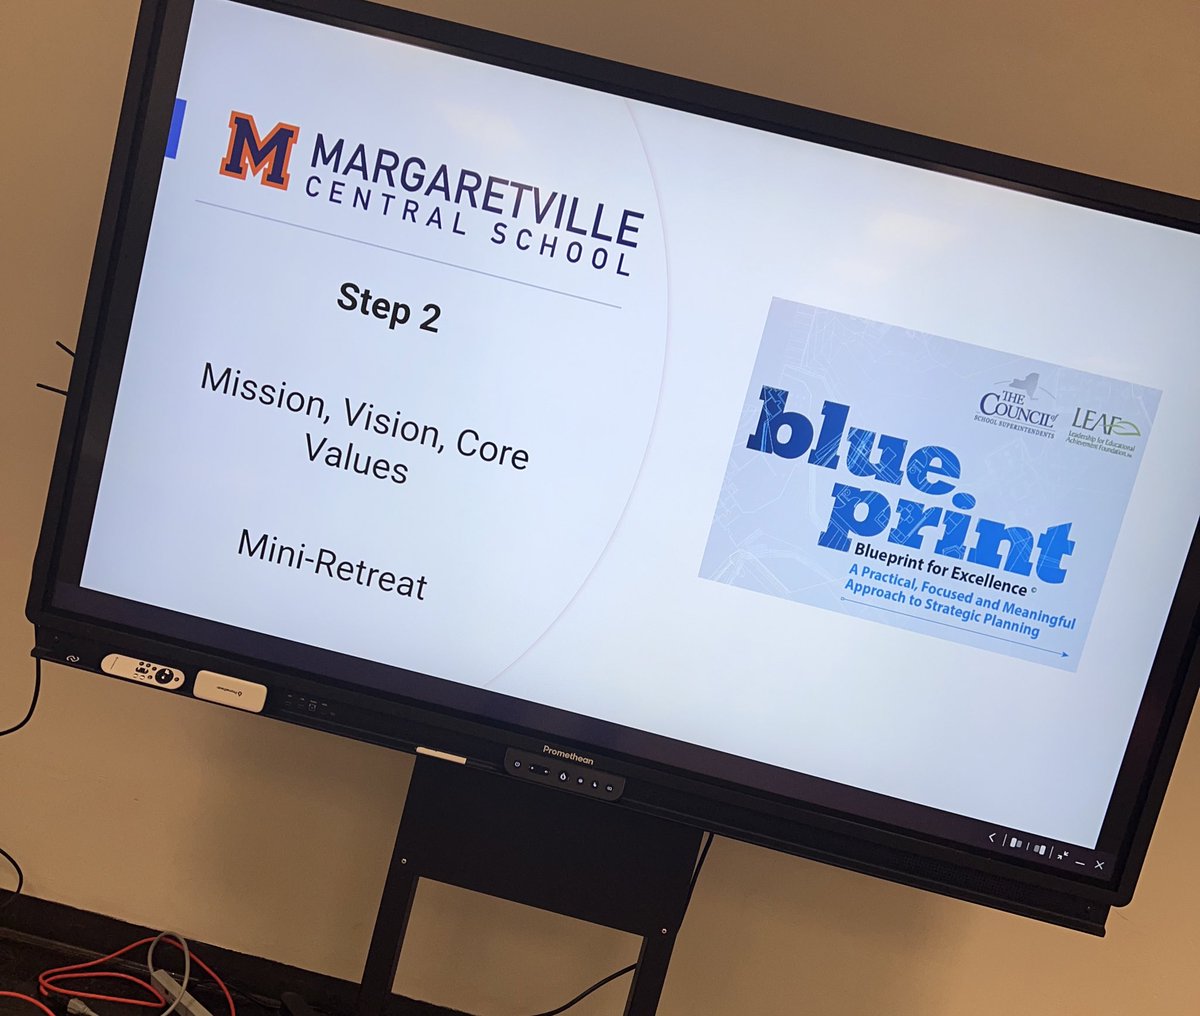 Focusing the work on a shared mission and vision is paramount to a district's success. As a leadership team (administrators) & governance team (BOE  myself), we are thrilled to be going through this process with @KCMcgowan-thank you!

#BluePrintForExcellence 
#EquityInEducation